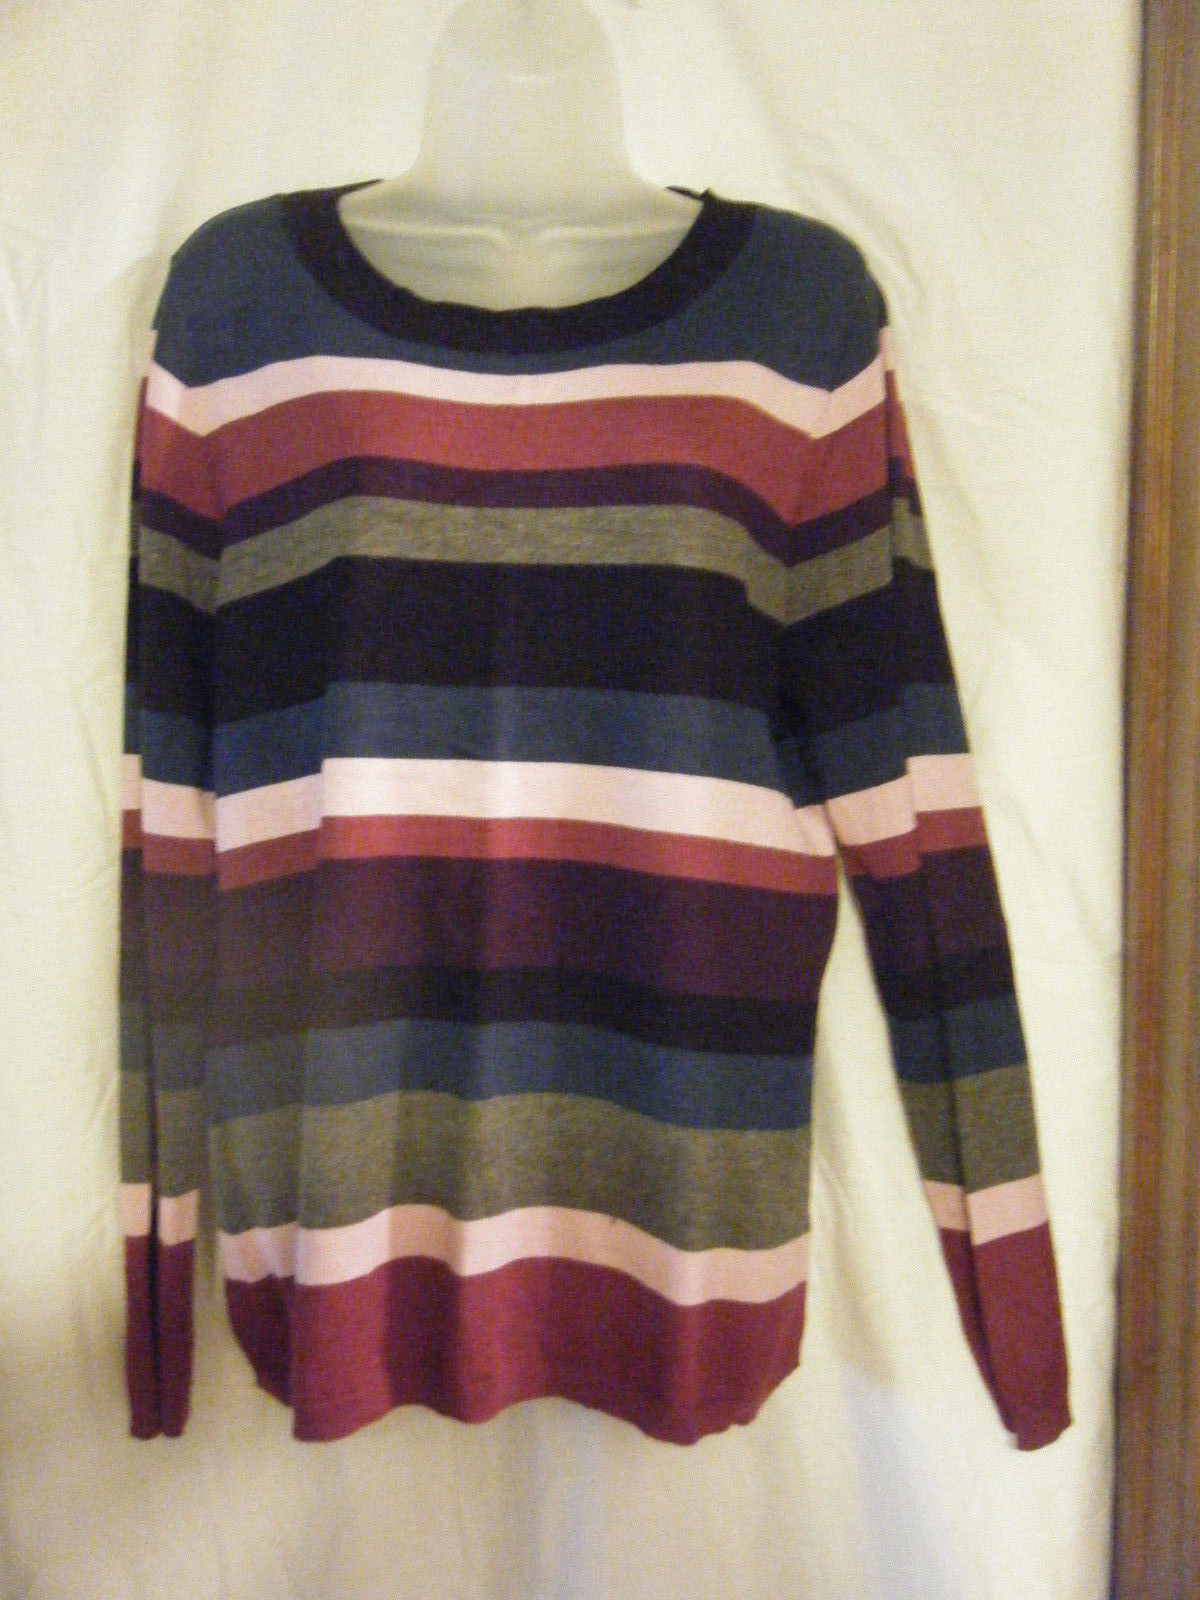 Primary image for Charter Club Striped Scoop Neck Sweater - Size XL